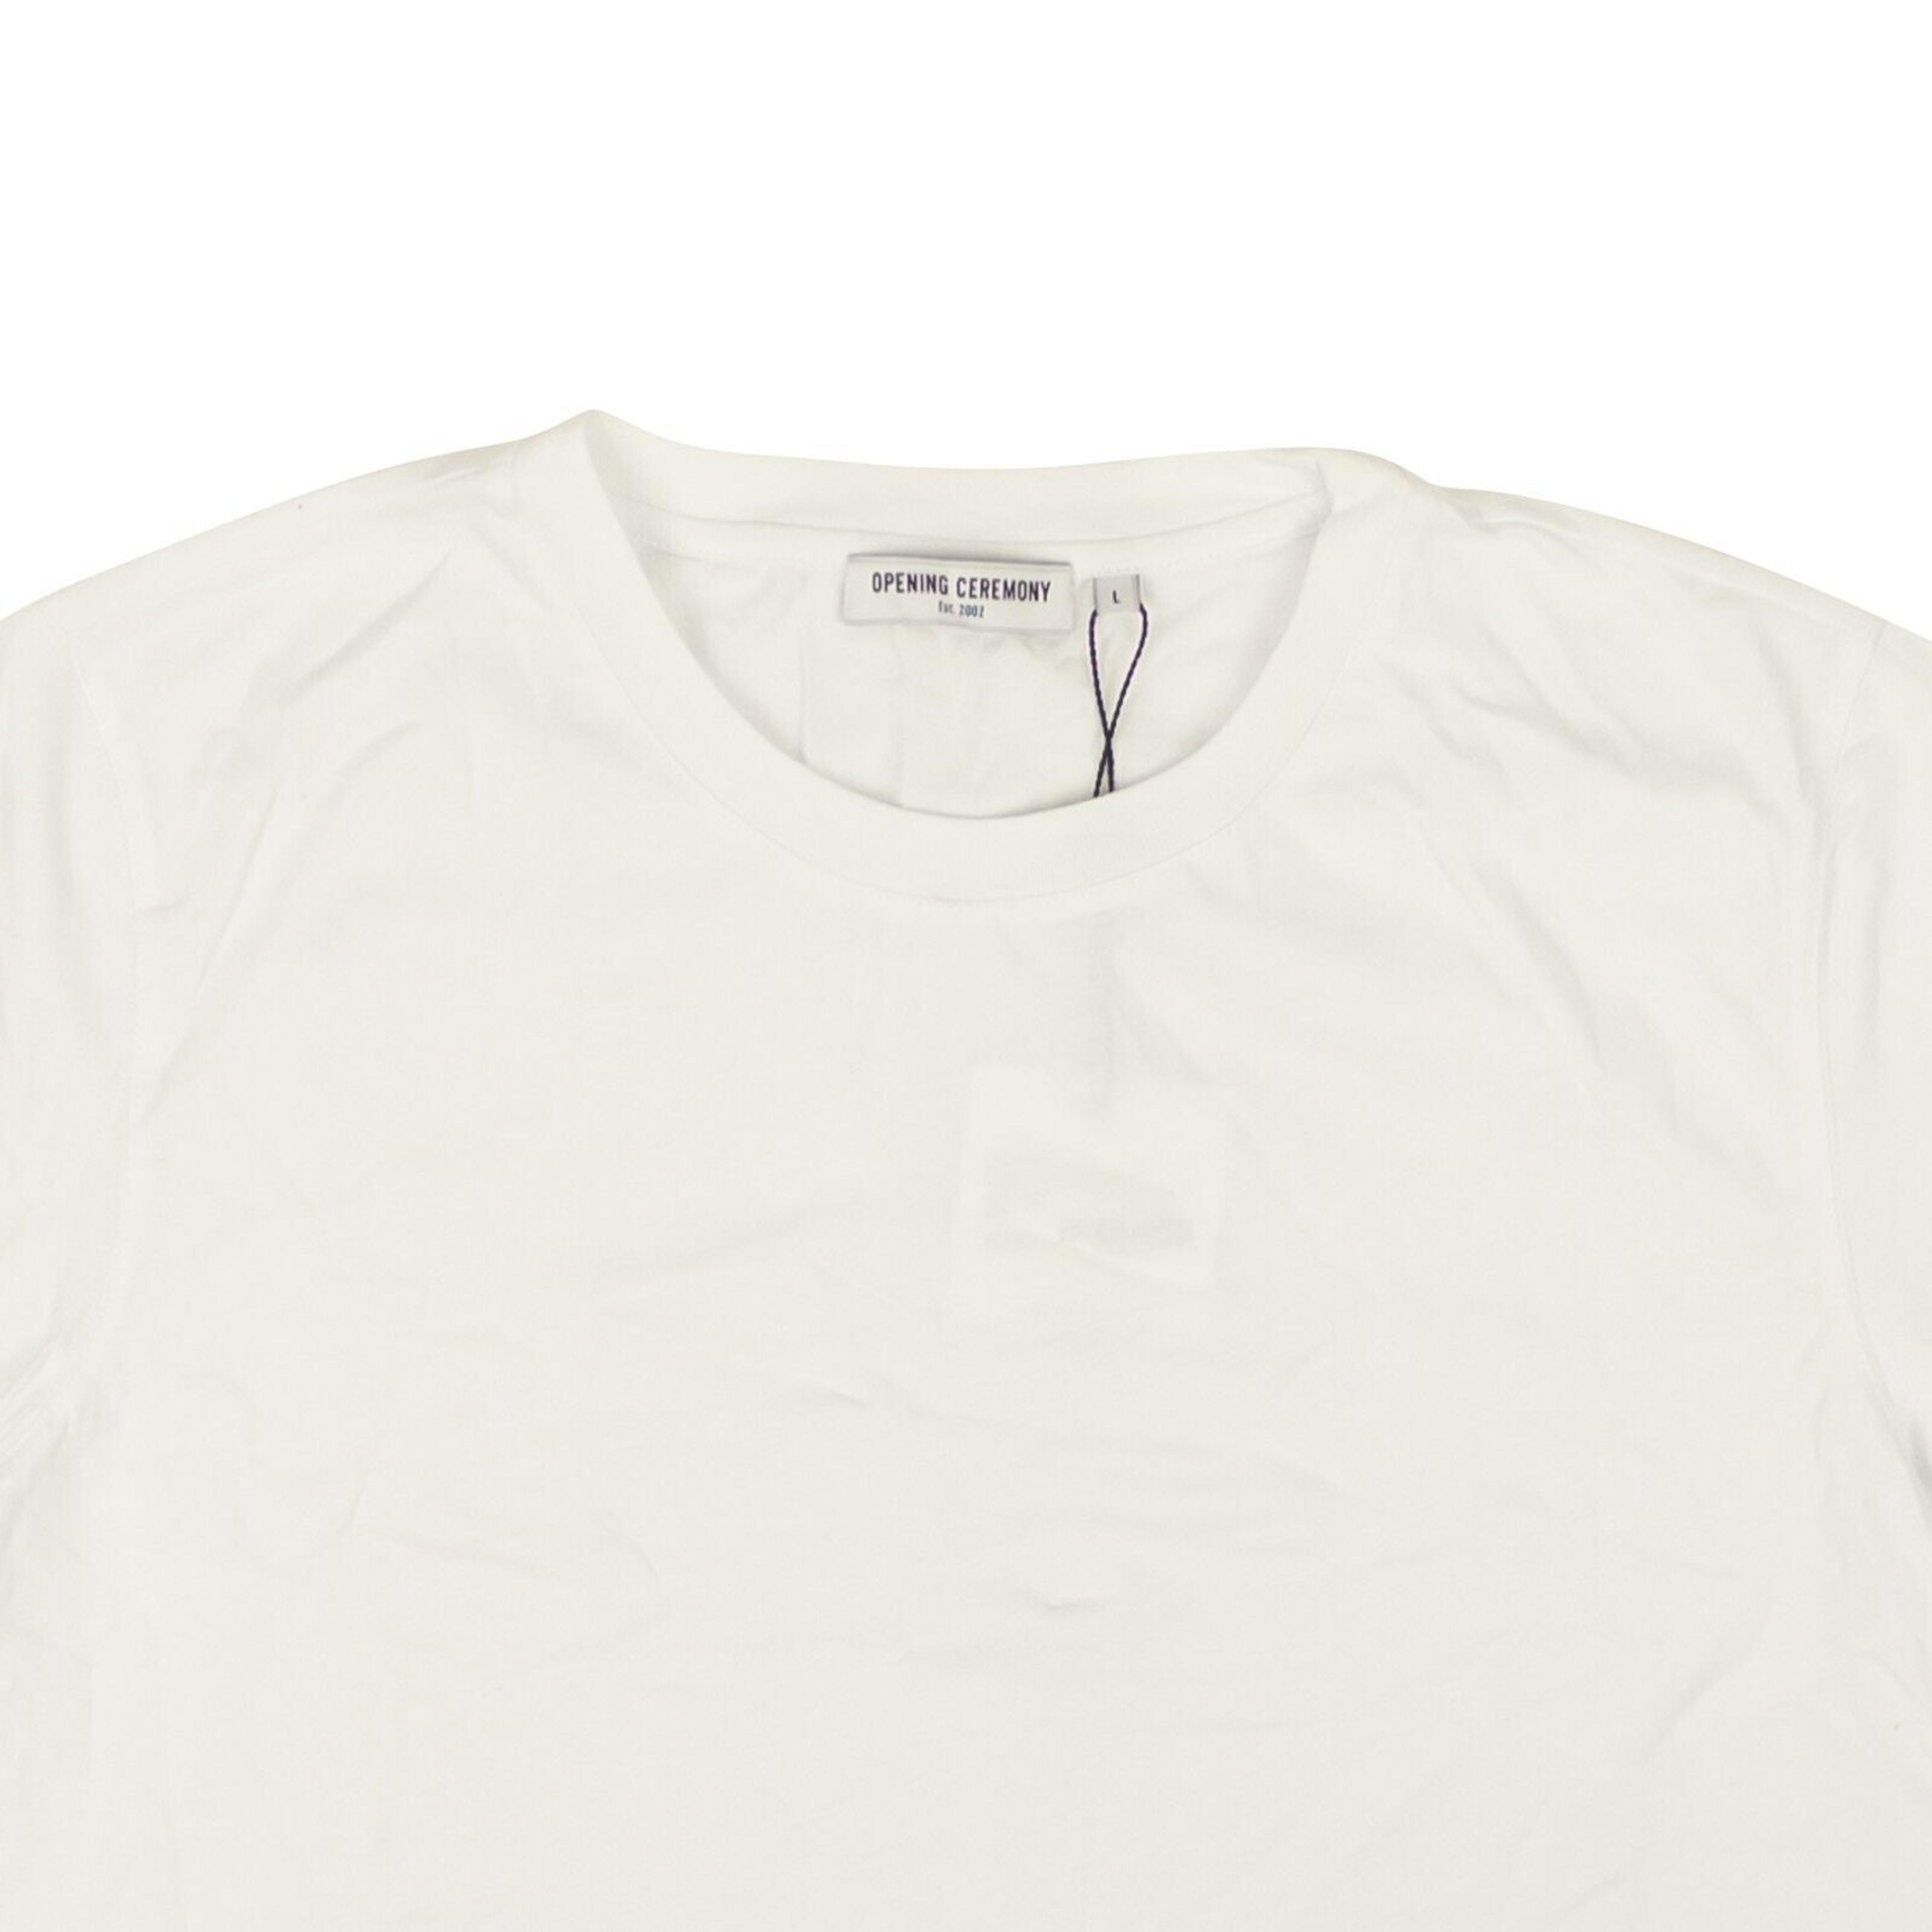 Alternate View 1 of Chalk White Cotton Blank OC Cropped T-Shirt